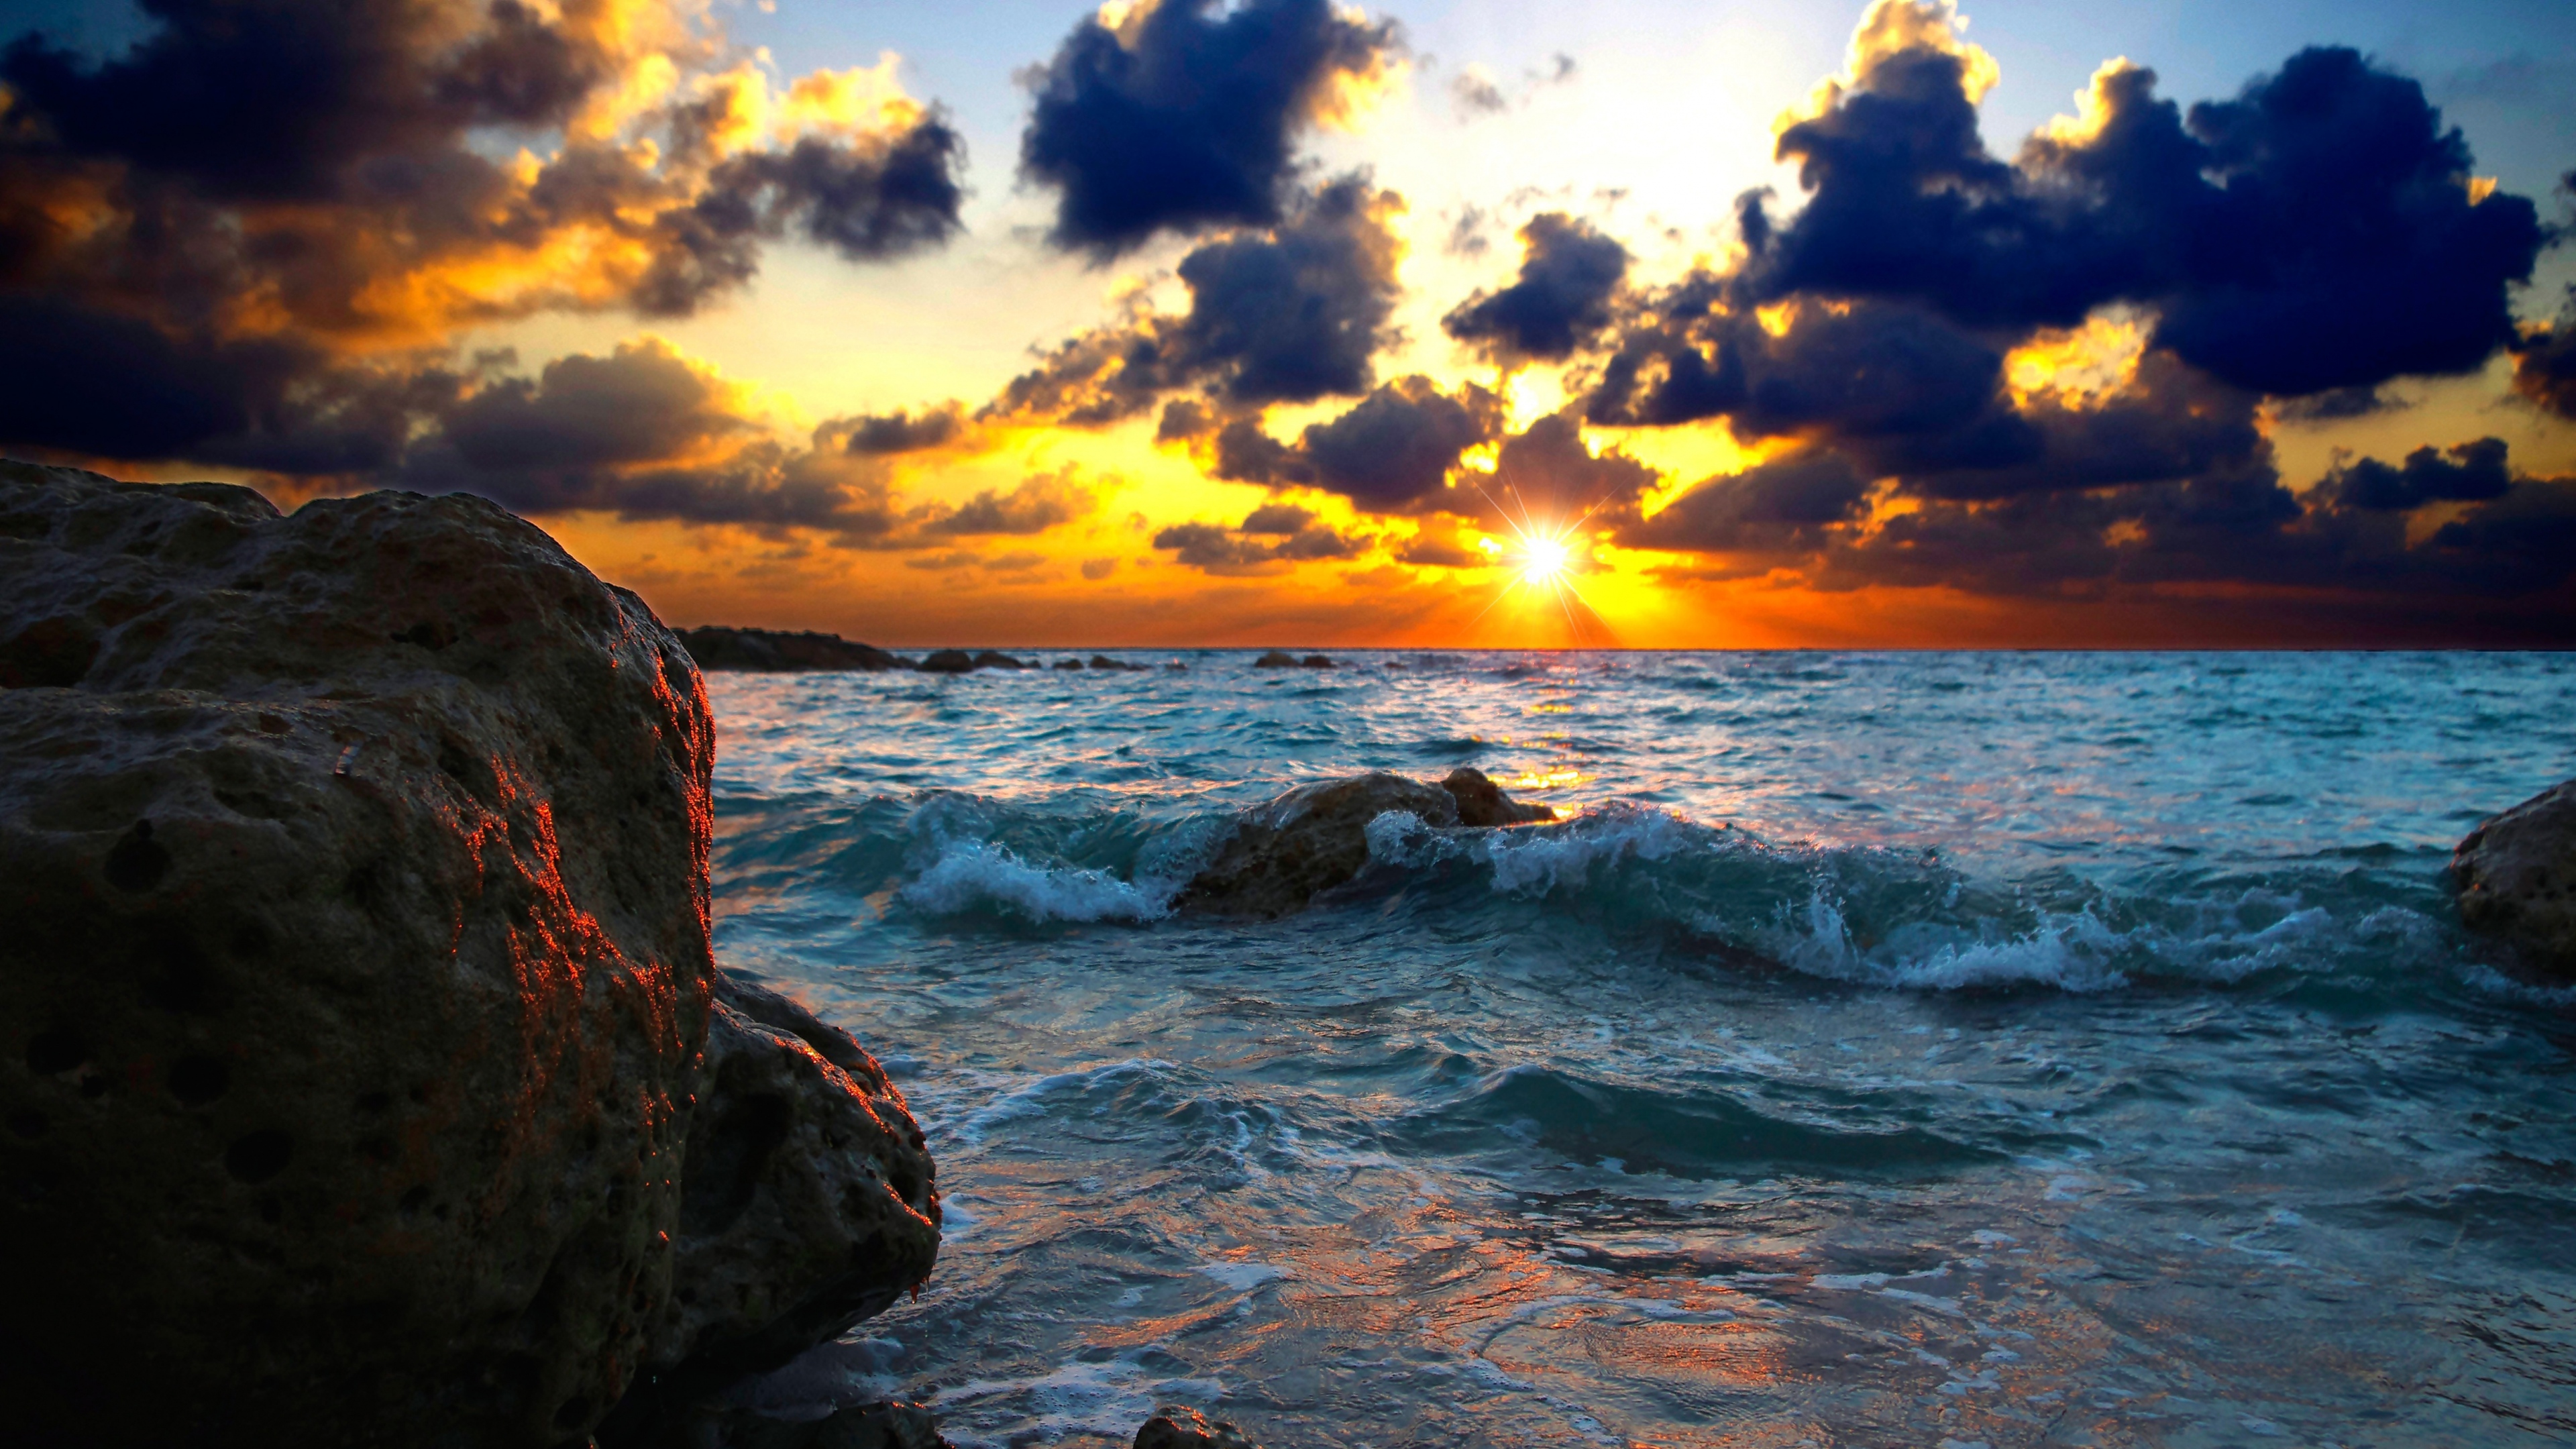 Ocean Sunset Photography Wallpapers